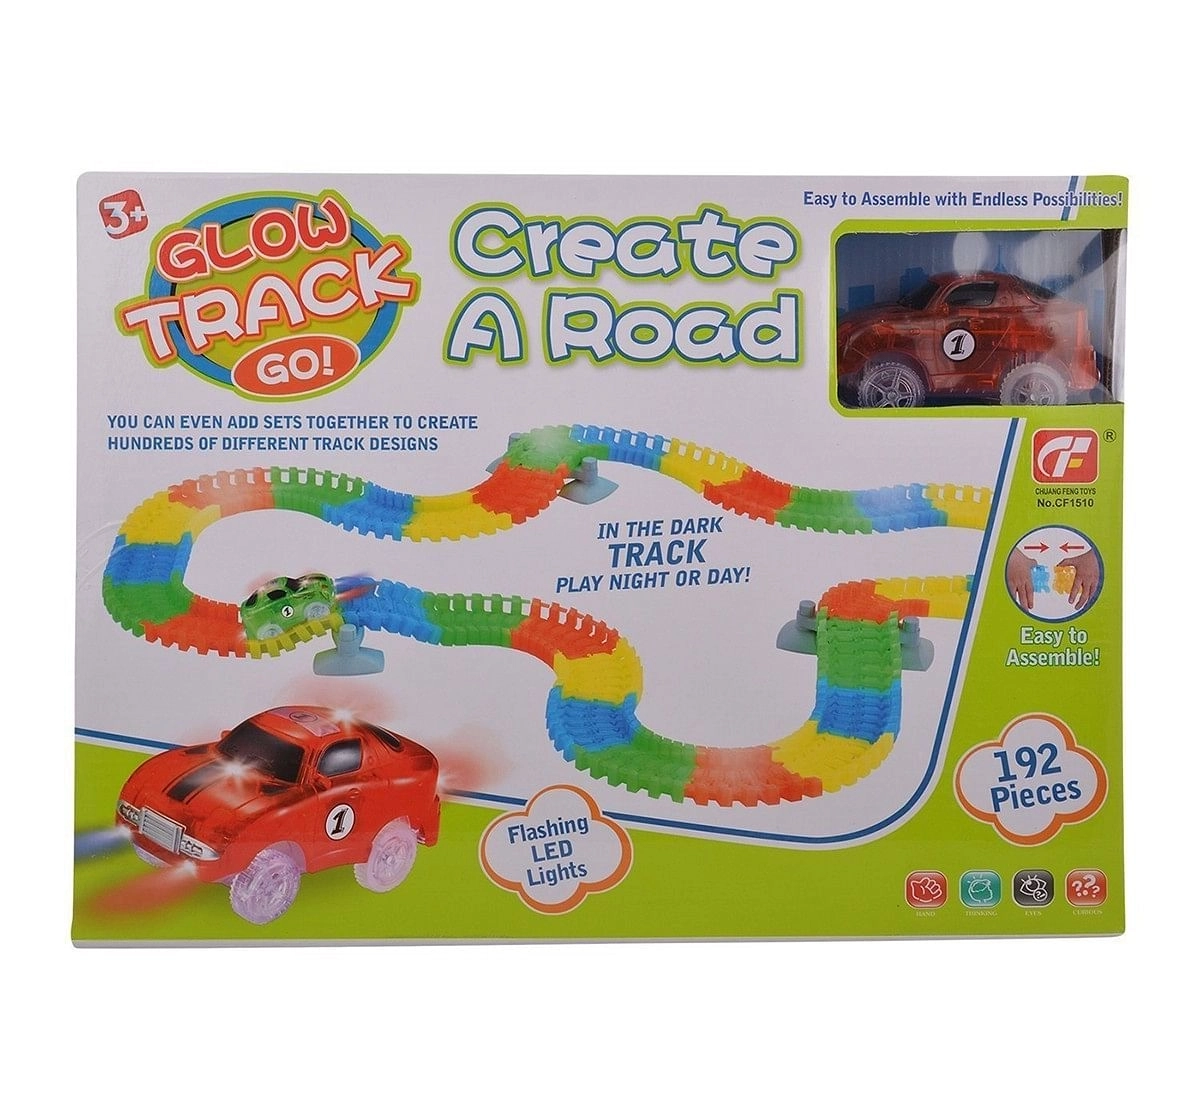 Turbo Trax 192 PCS Track and Car Set for Kids age 3Y+ 